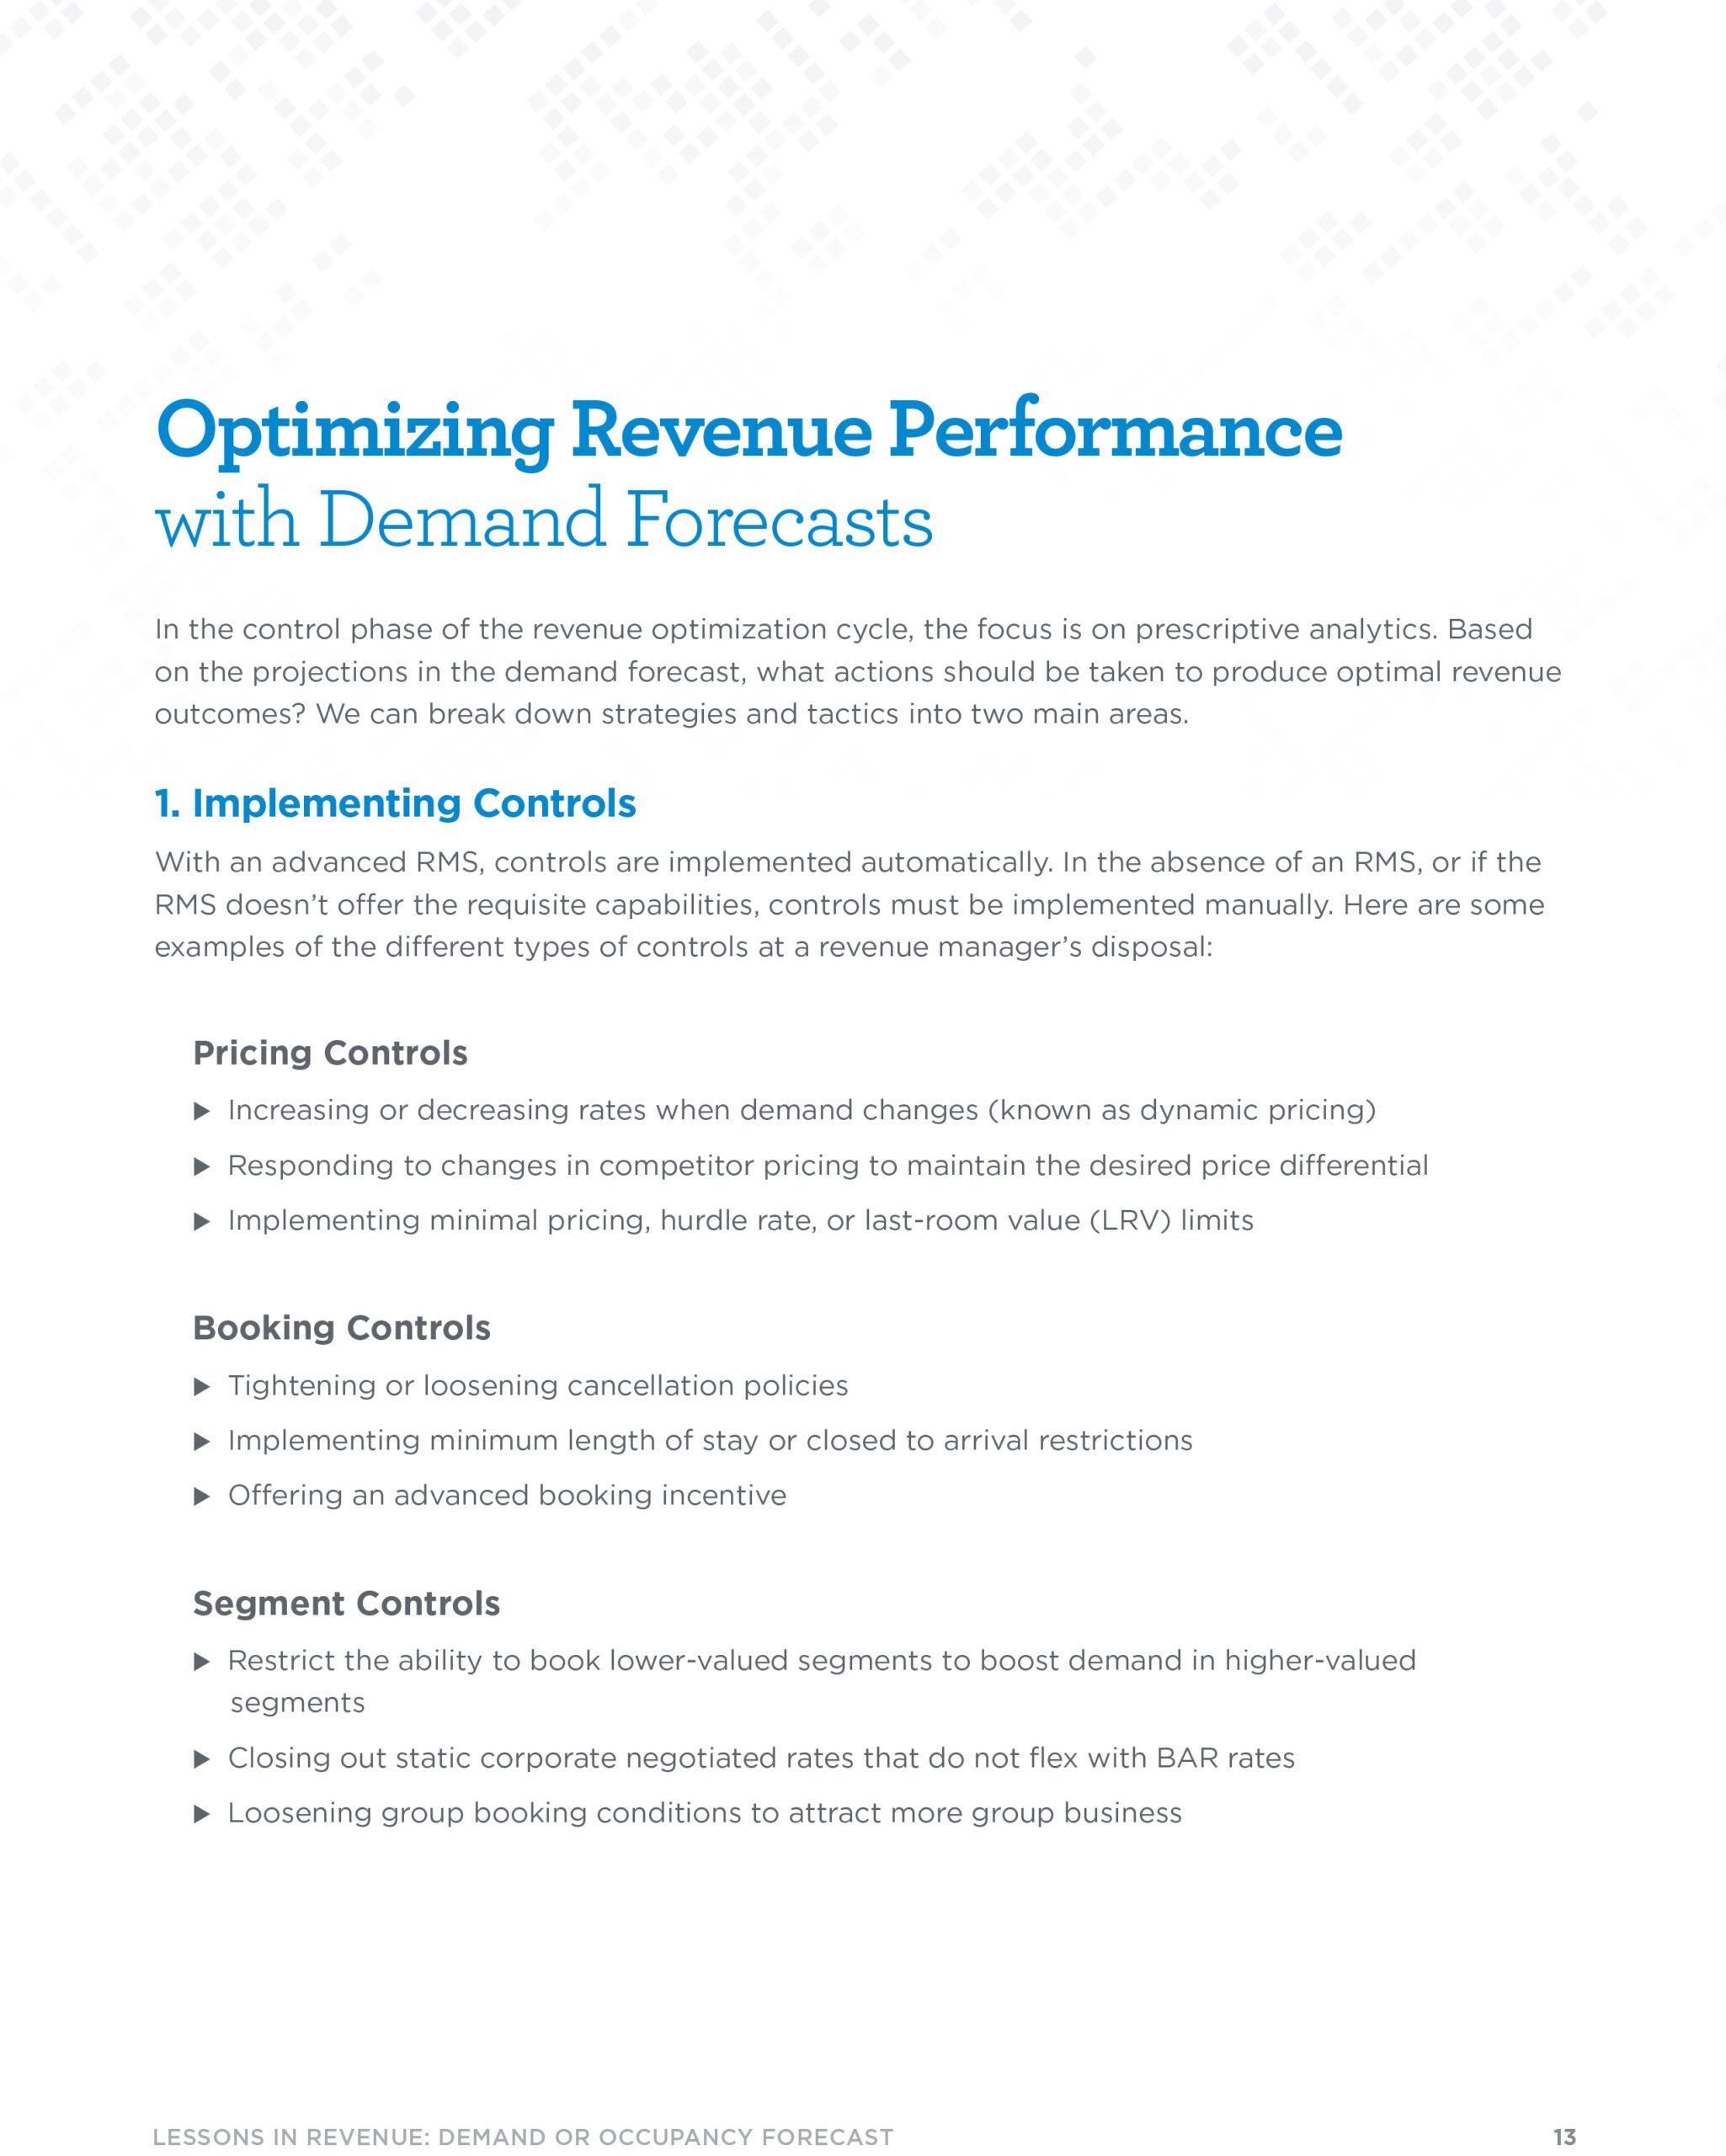 Page 12 - Optimizing Revenue Performance with Demand Forecasts